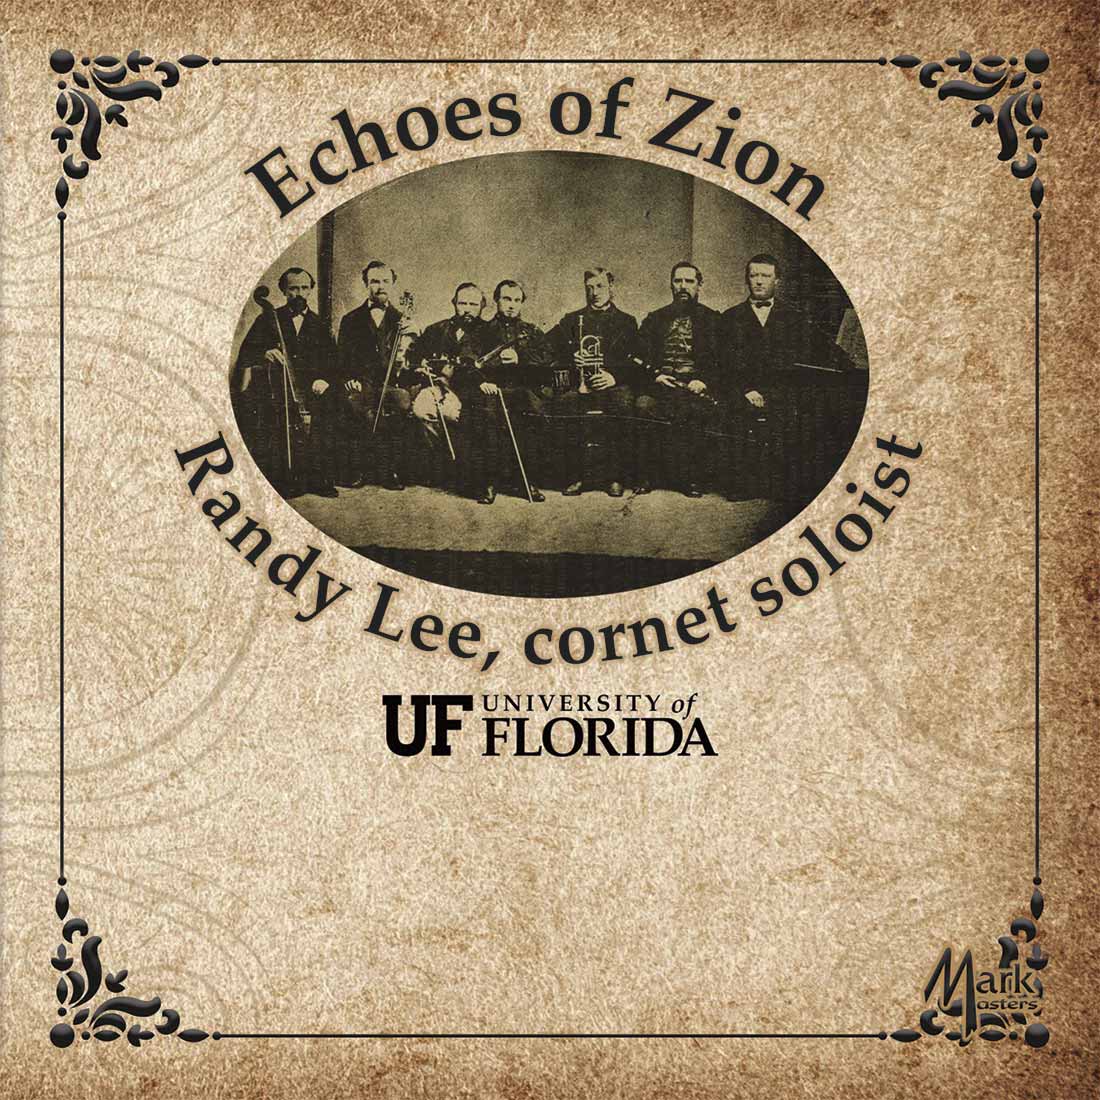 Randy Lee — “Echoes of Zion” (Mark Masters Series, 2022)